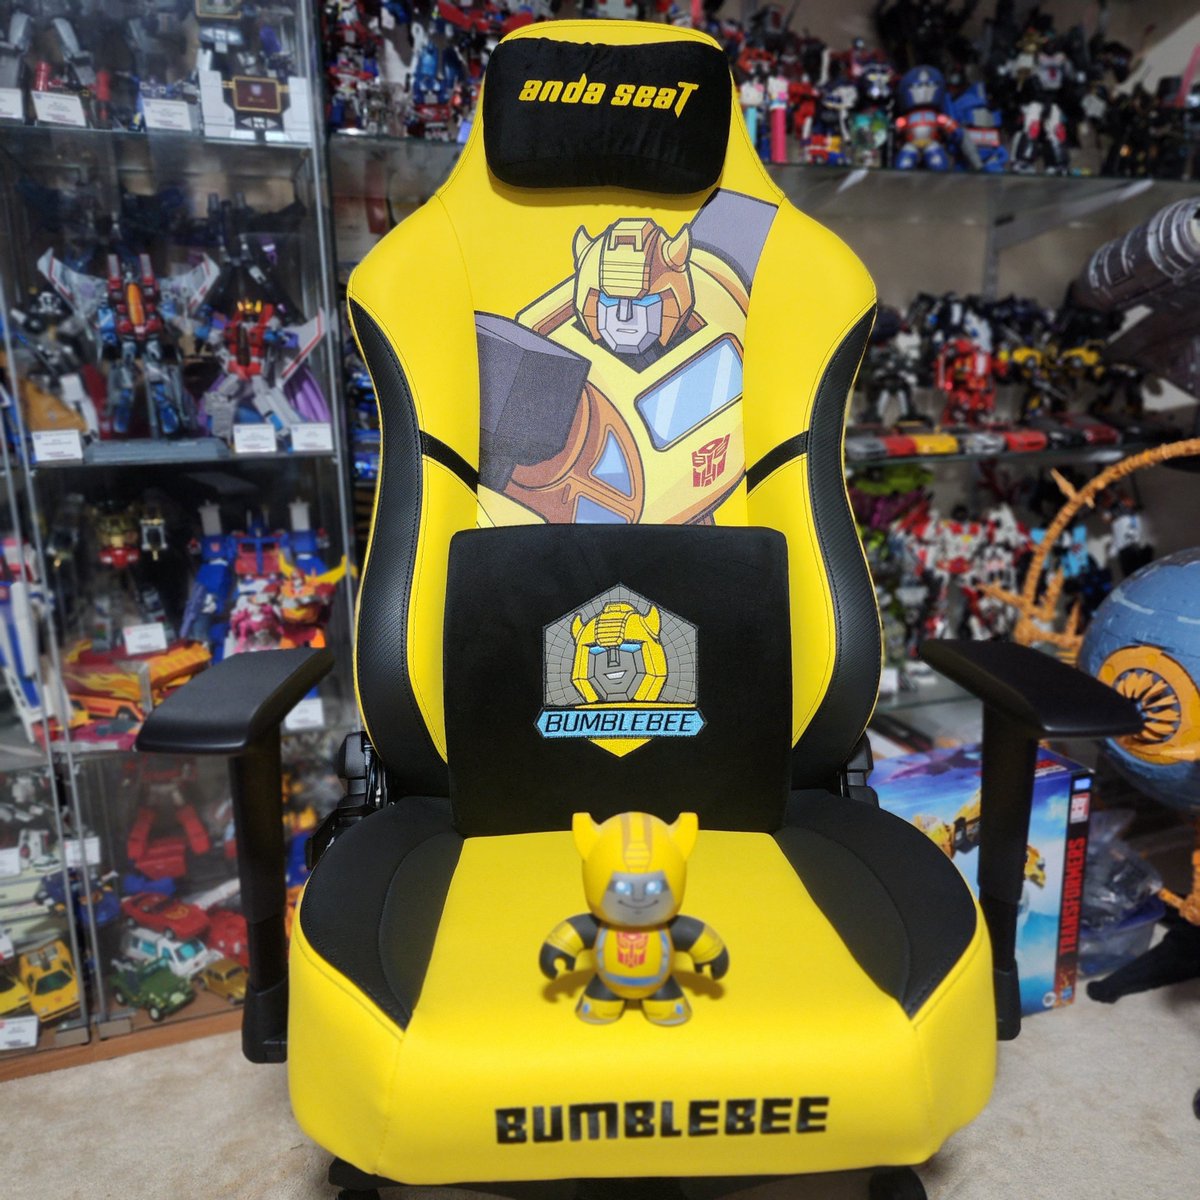 Complete your collection setup with AndaSeat Transformers Editon. #Megatron #Bumblebee  #OptimusPrime We are here, we are waiting 
andaseat.com
#AndaSeat #Transformers #gamingchair  
📸C@ JamesGarriss/Kongs-R-Us/alfonsonation